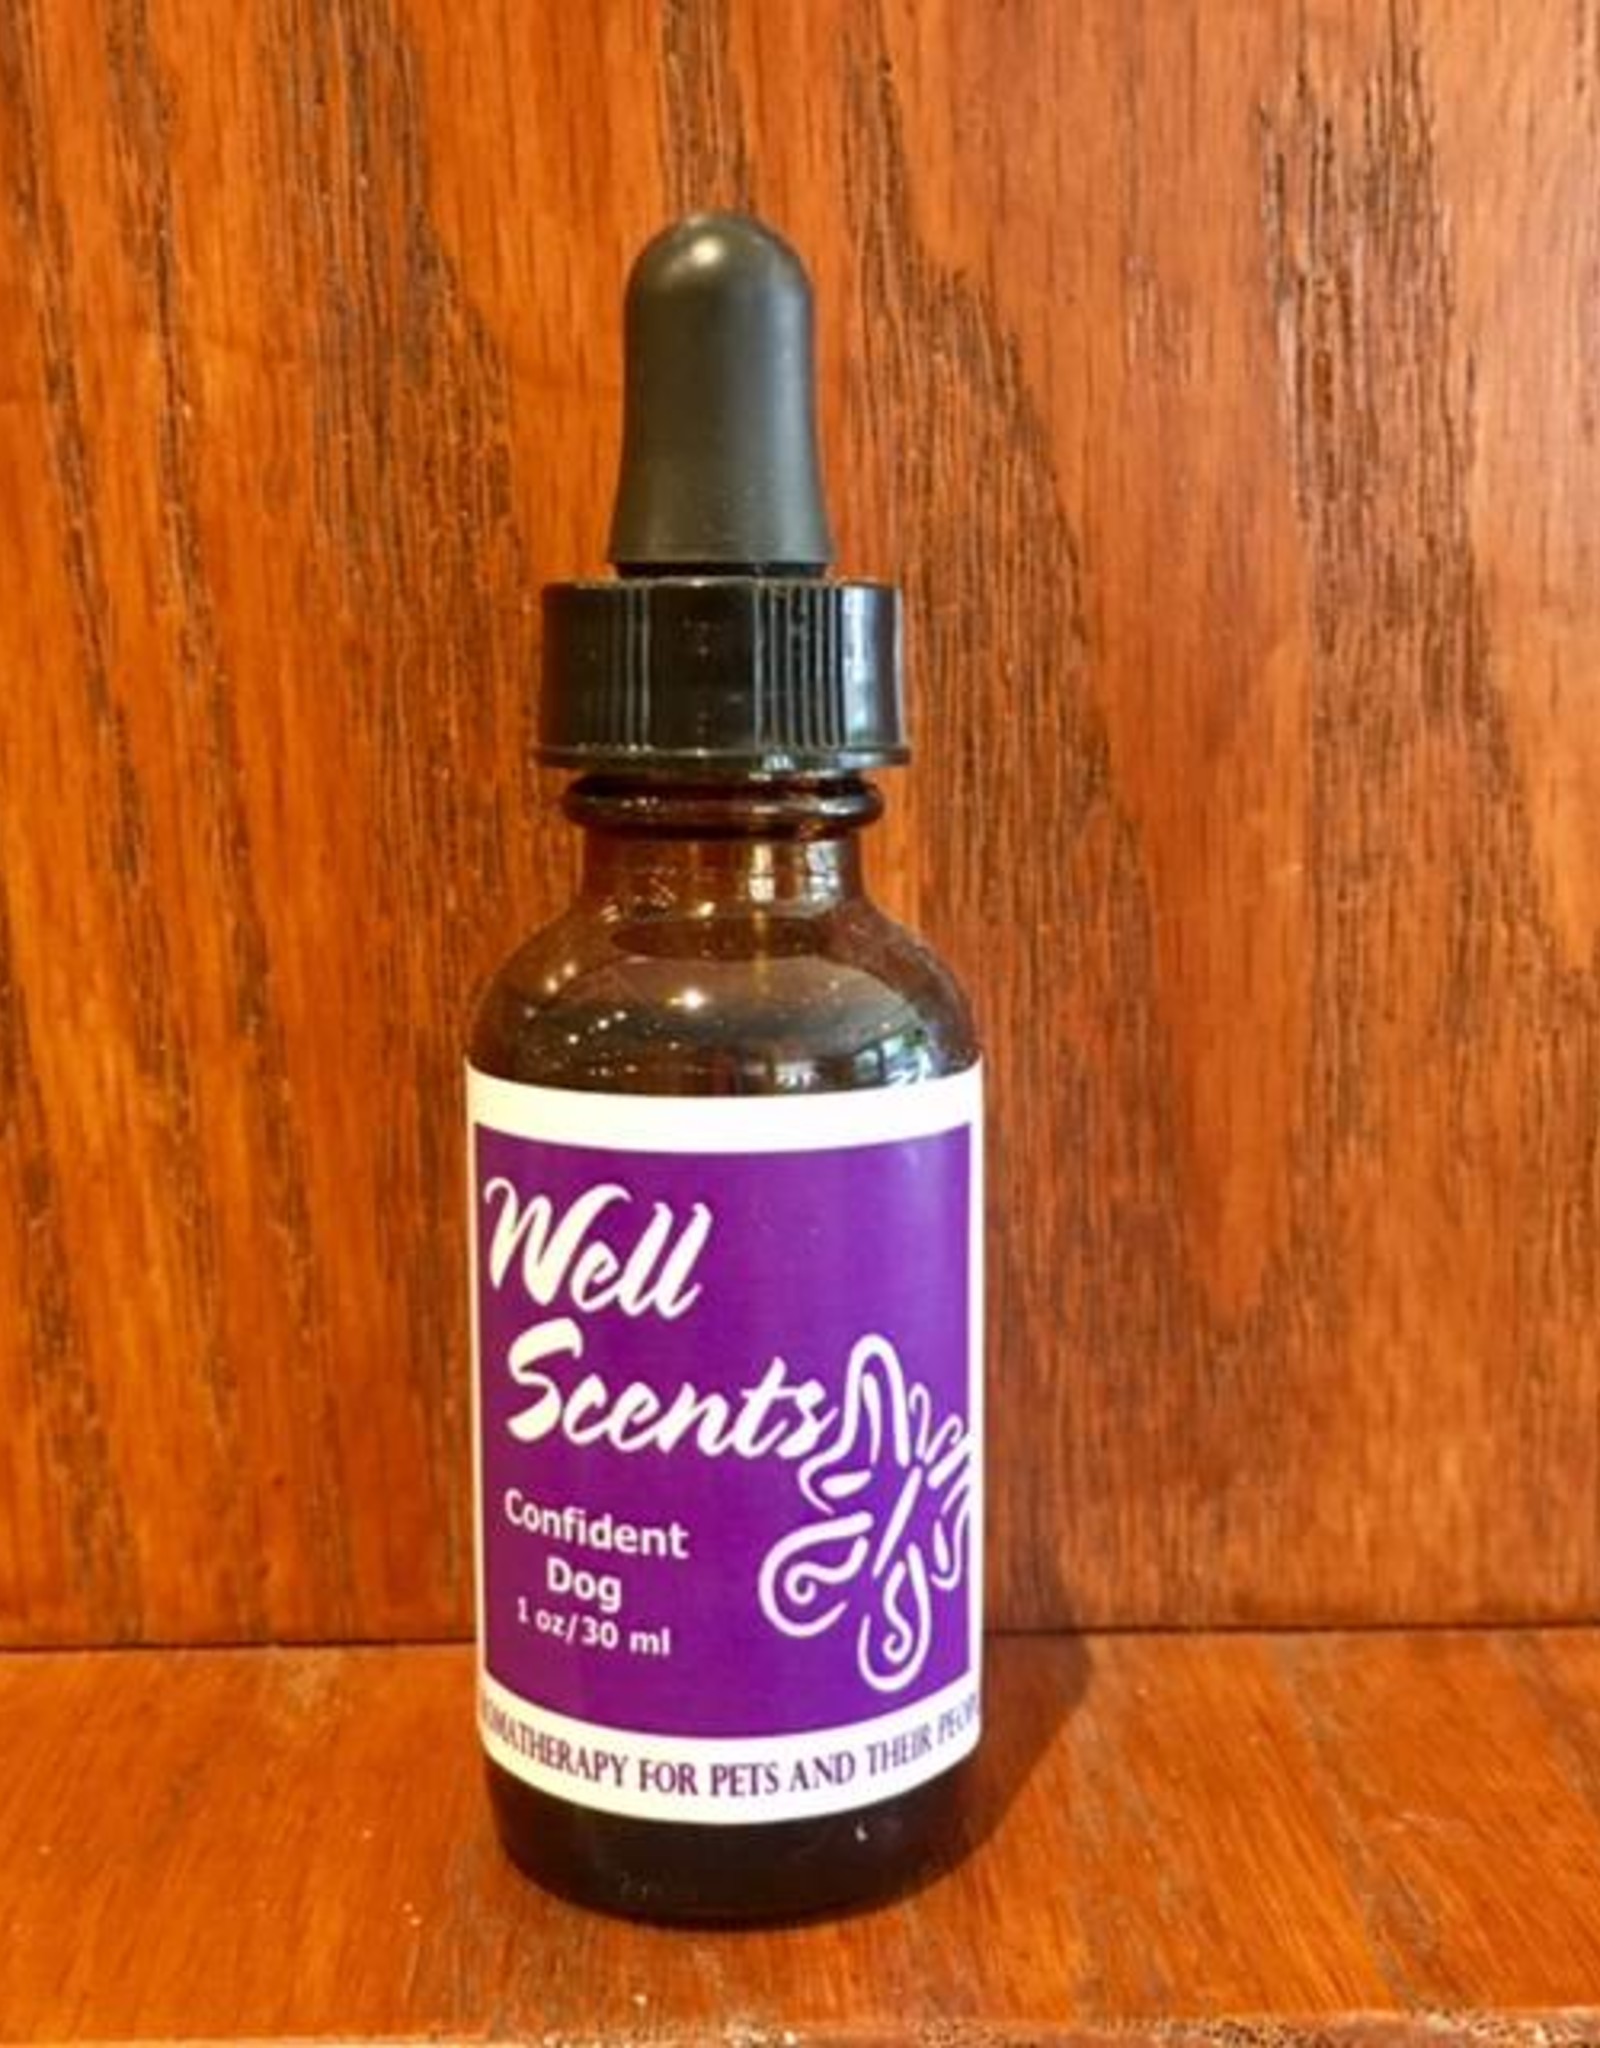 Well Scents Confident Dog 1oz